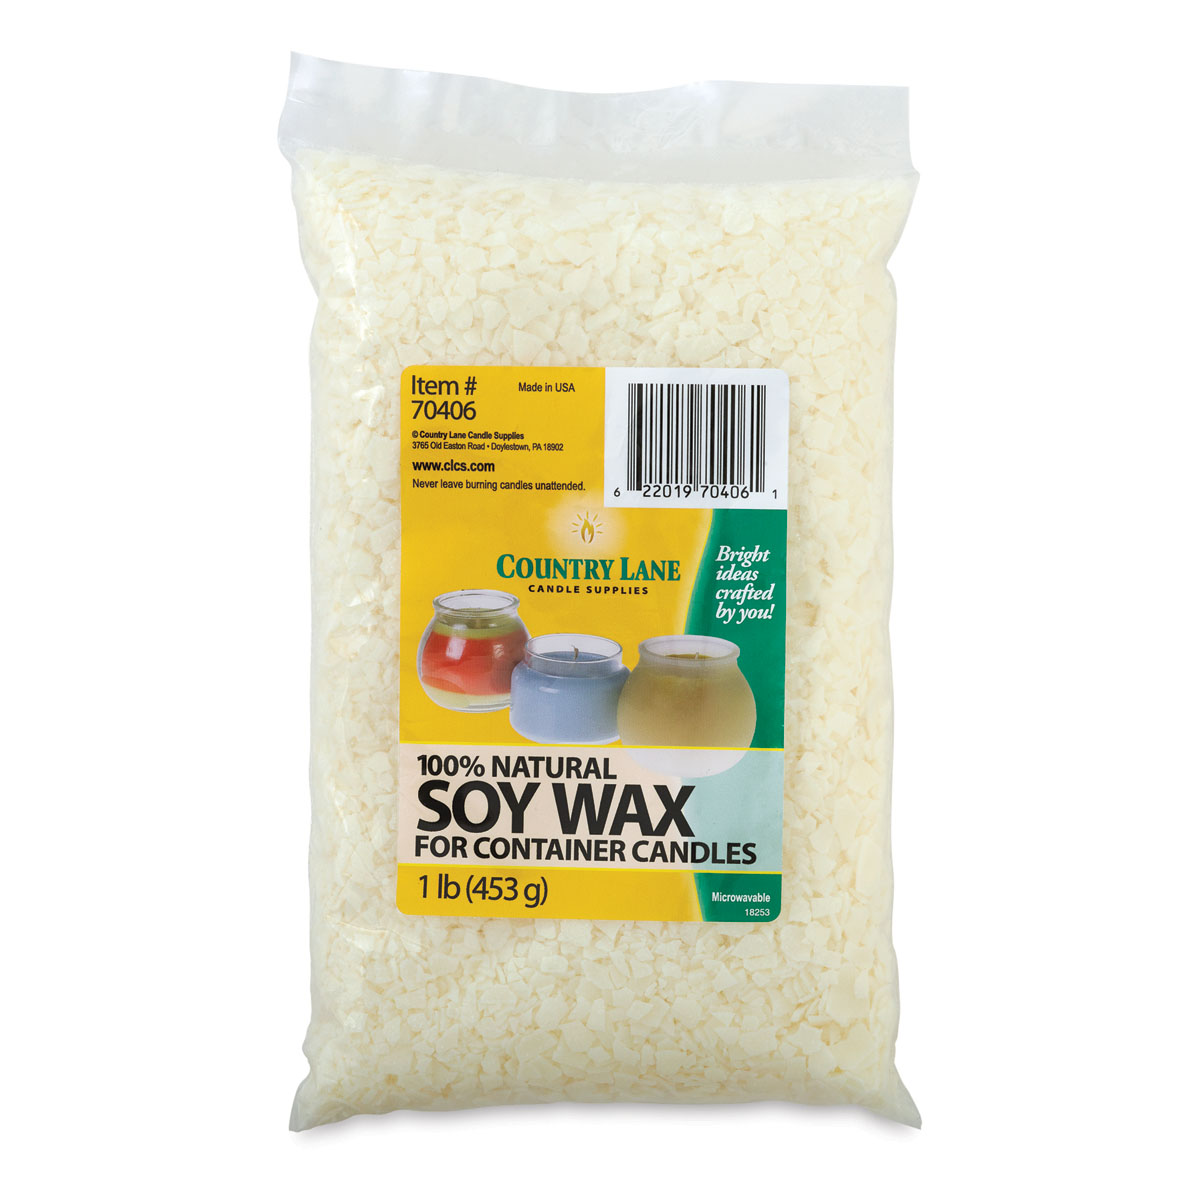 0.5 LB/1LB Pure White Soy Wax Flakes,Natural Soy Wax Bulk For